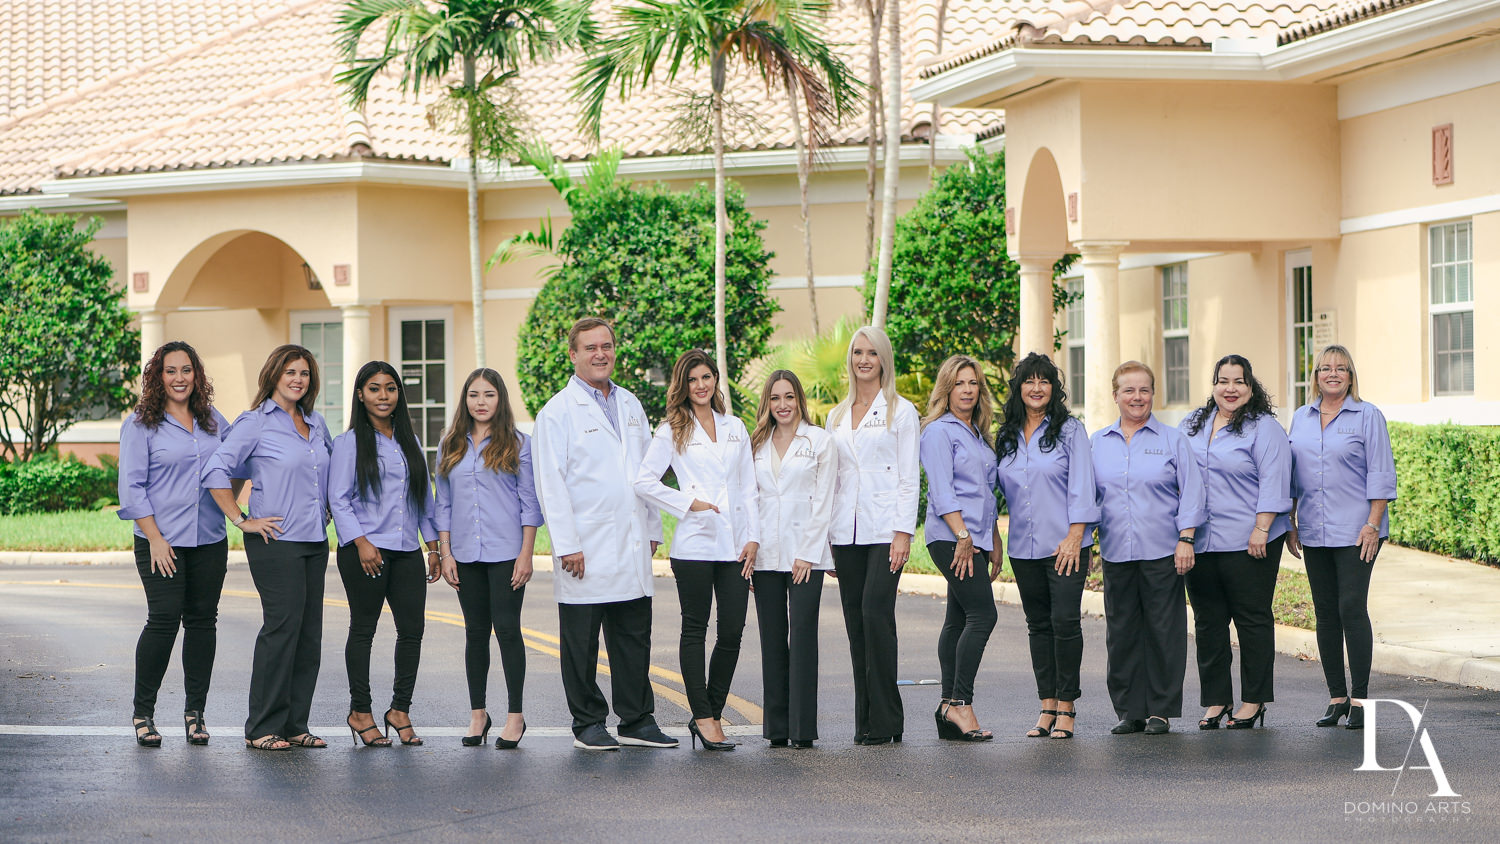 Dental Practice Corporate Photography in Fort Lauderdale by Domino Arts Photography